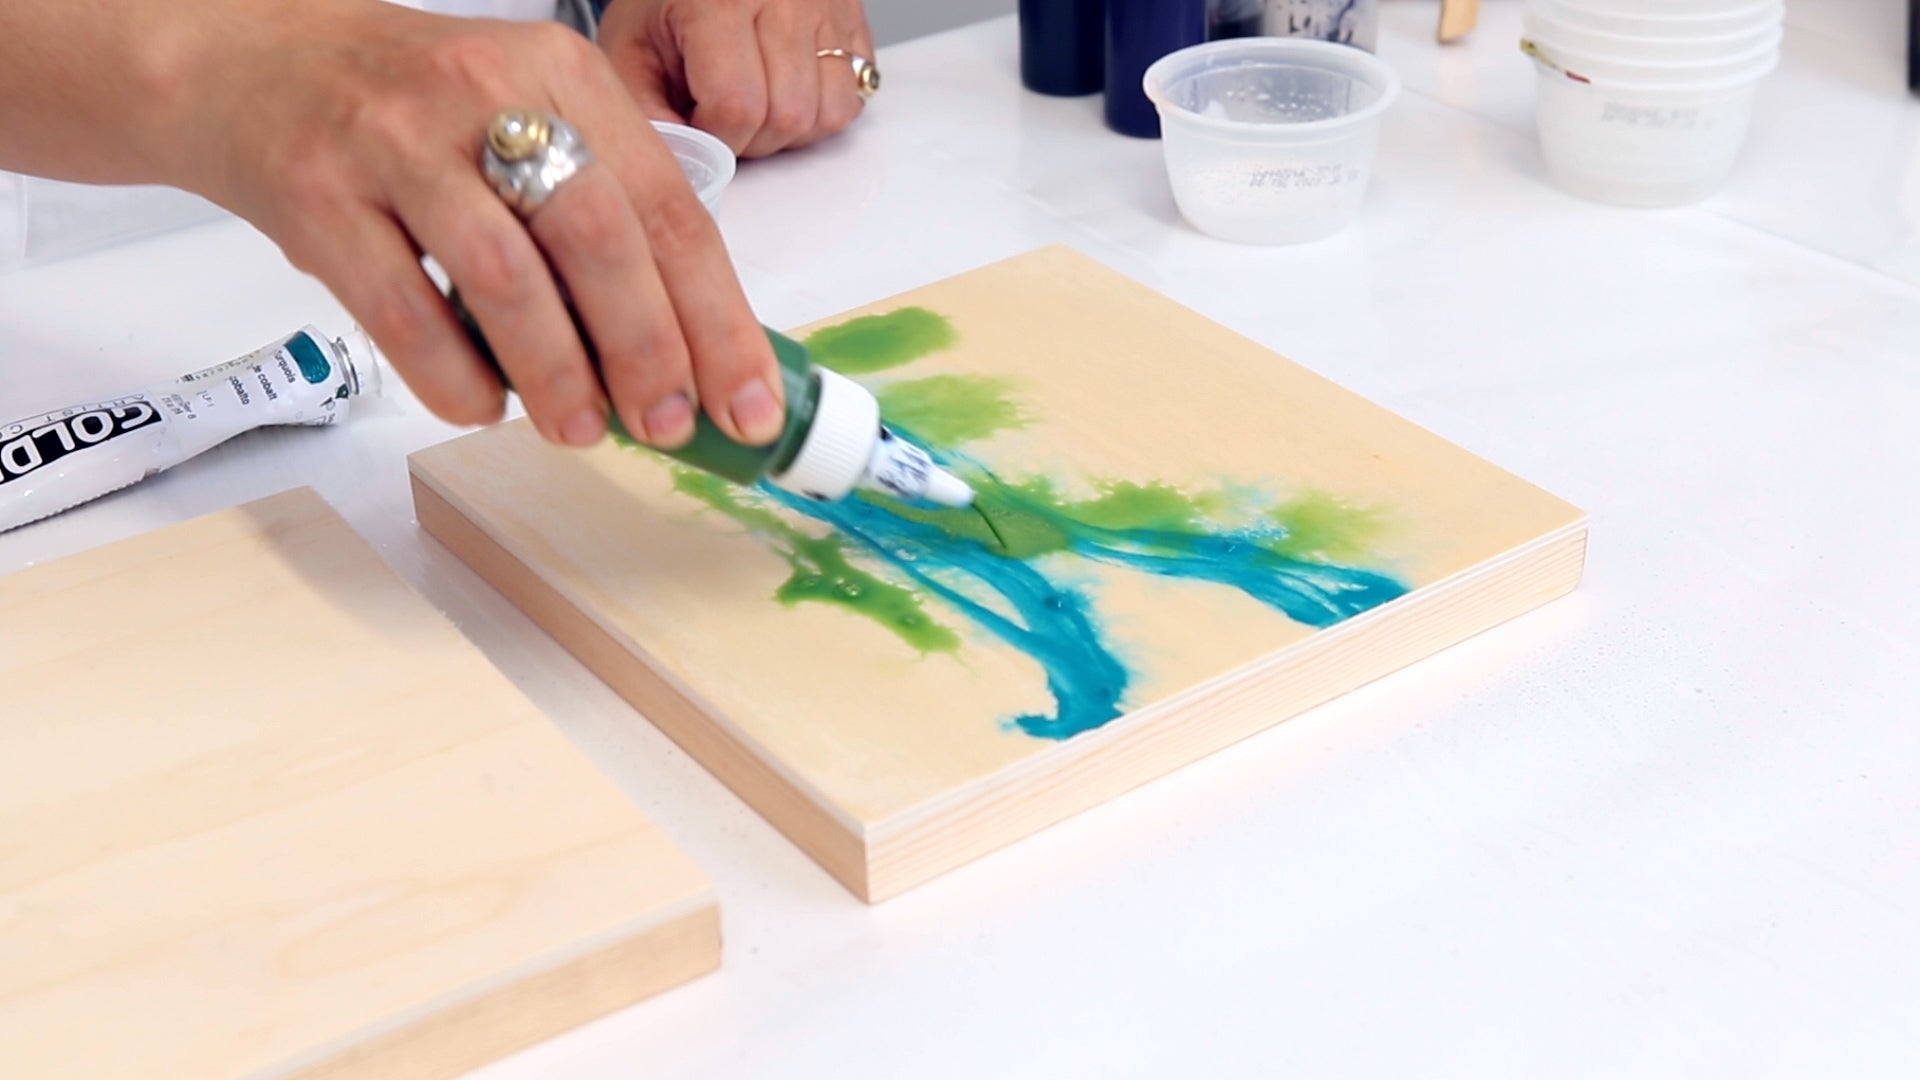 add drops of diluted acrylic paint to panel to create a mixed media painting